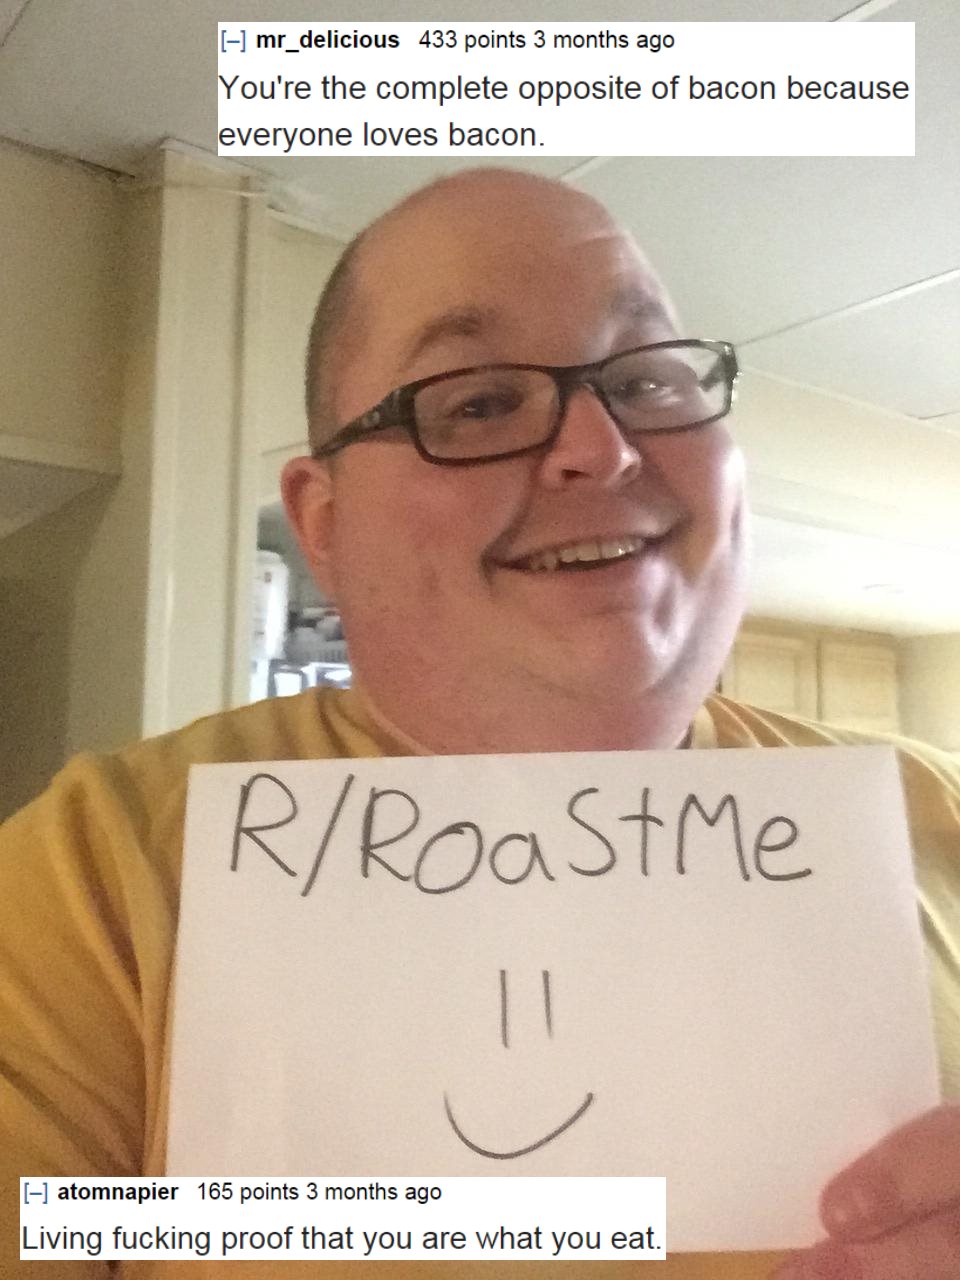 roast burn - mr_delicious 433 points 3 months ago You're the complete opposite of bacon because everyone loves bacon. RRoastMe atomnapier 165 points 3 months ago Living fucking proof that you are what you eat.